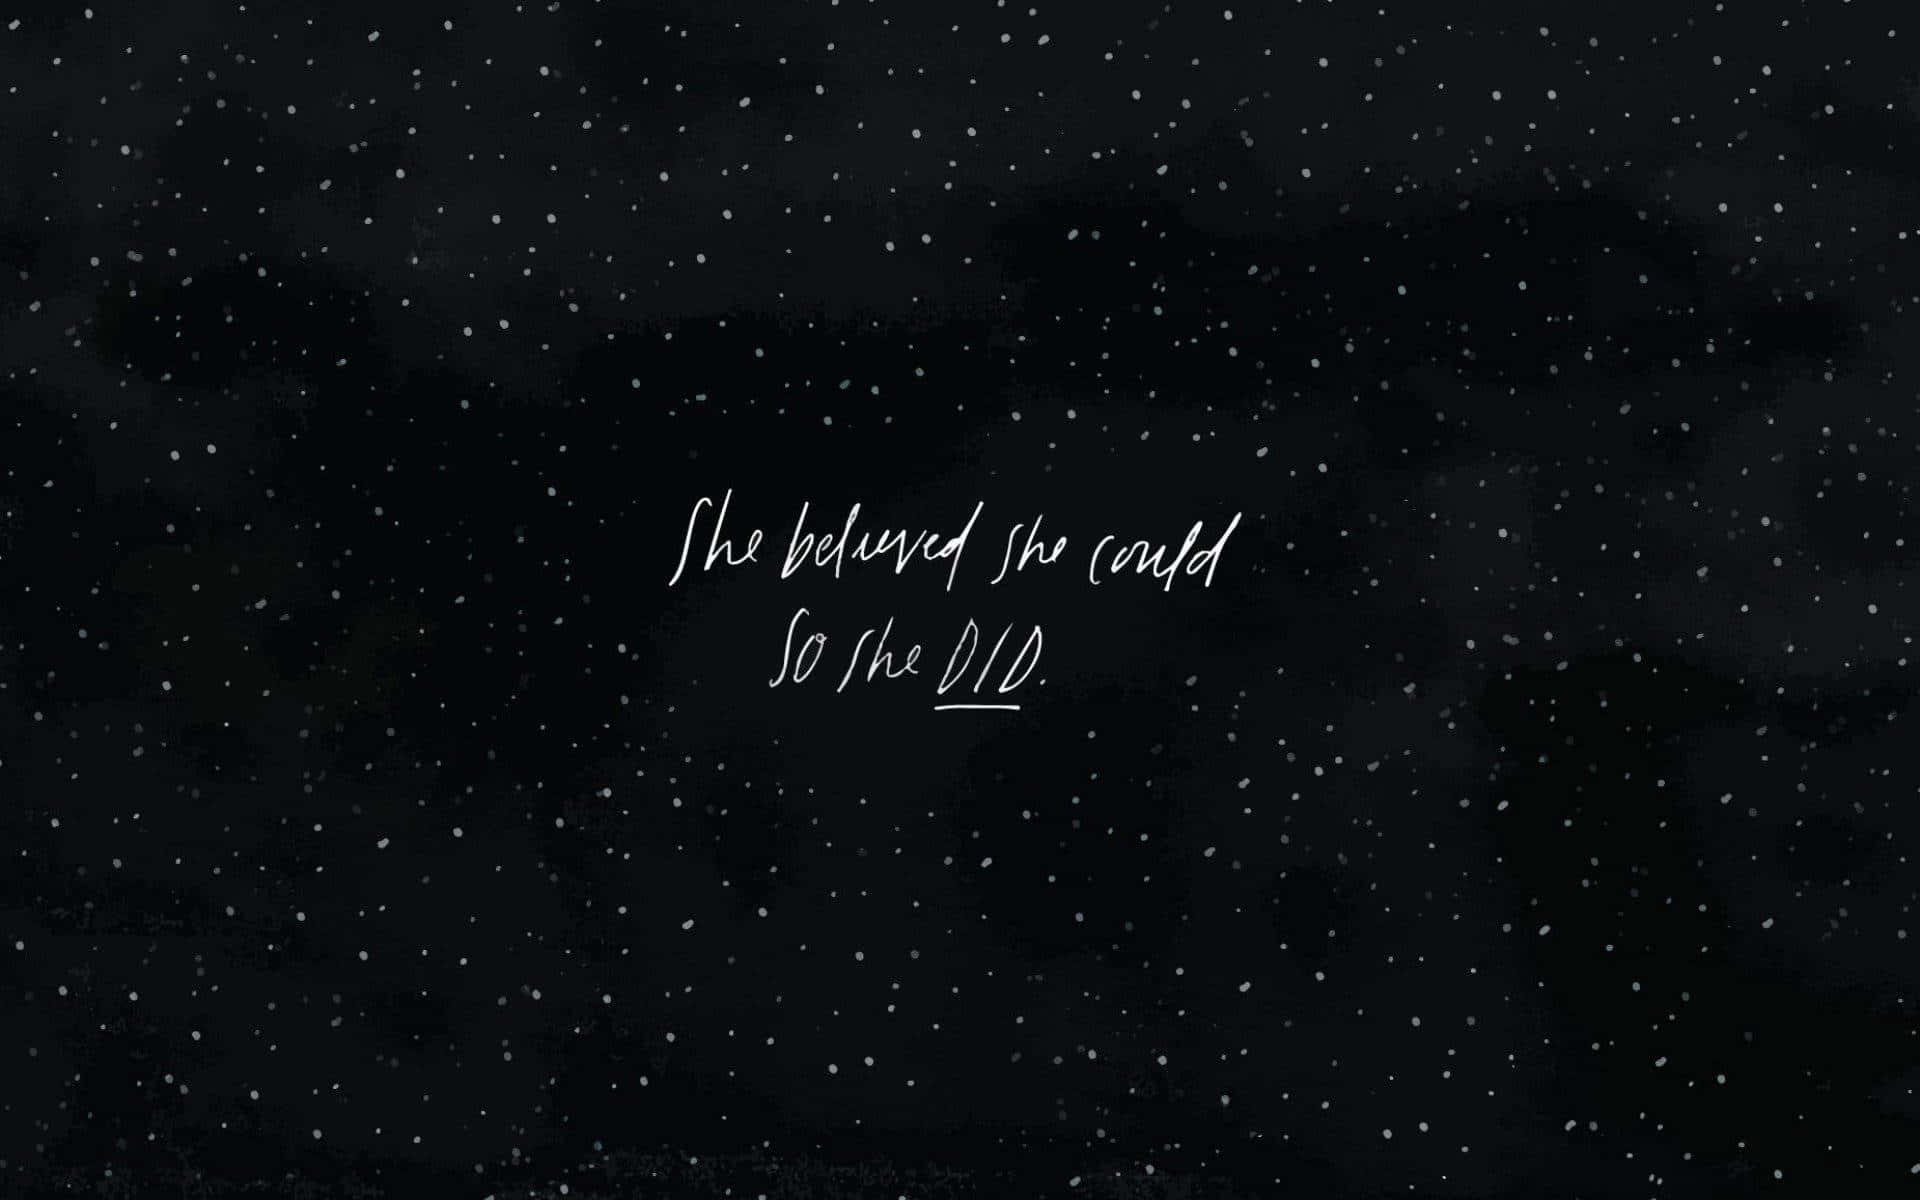 Inspirational Quote On A Background Of Dark Cute Small Dots